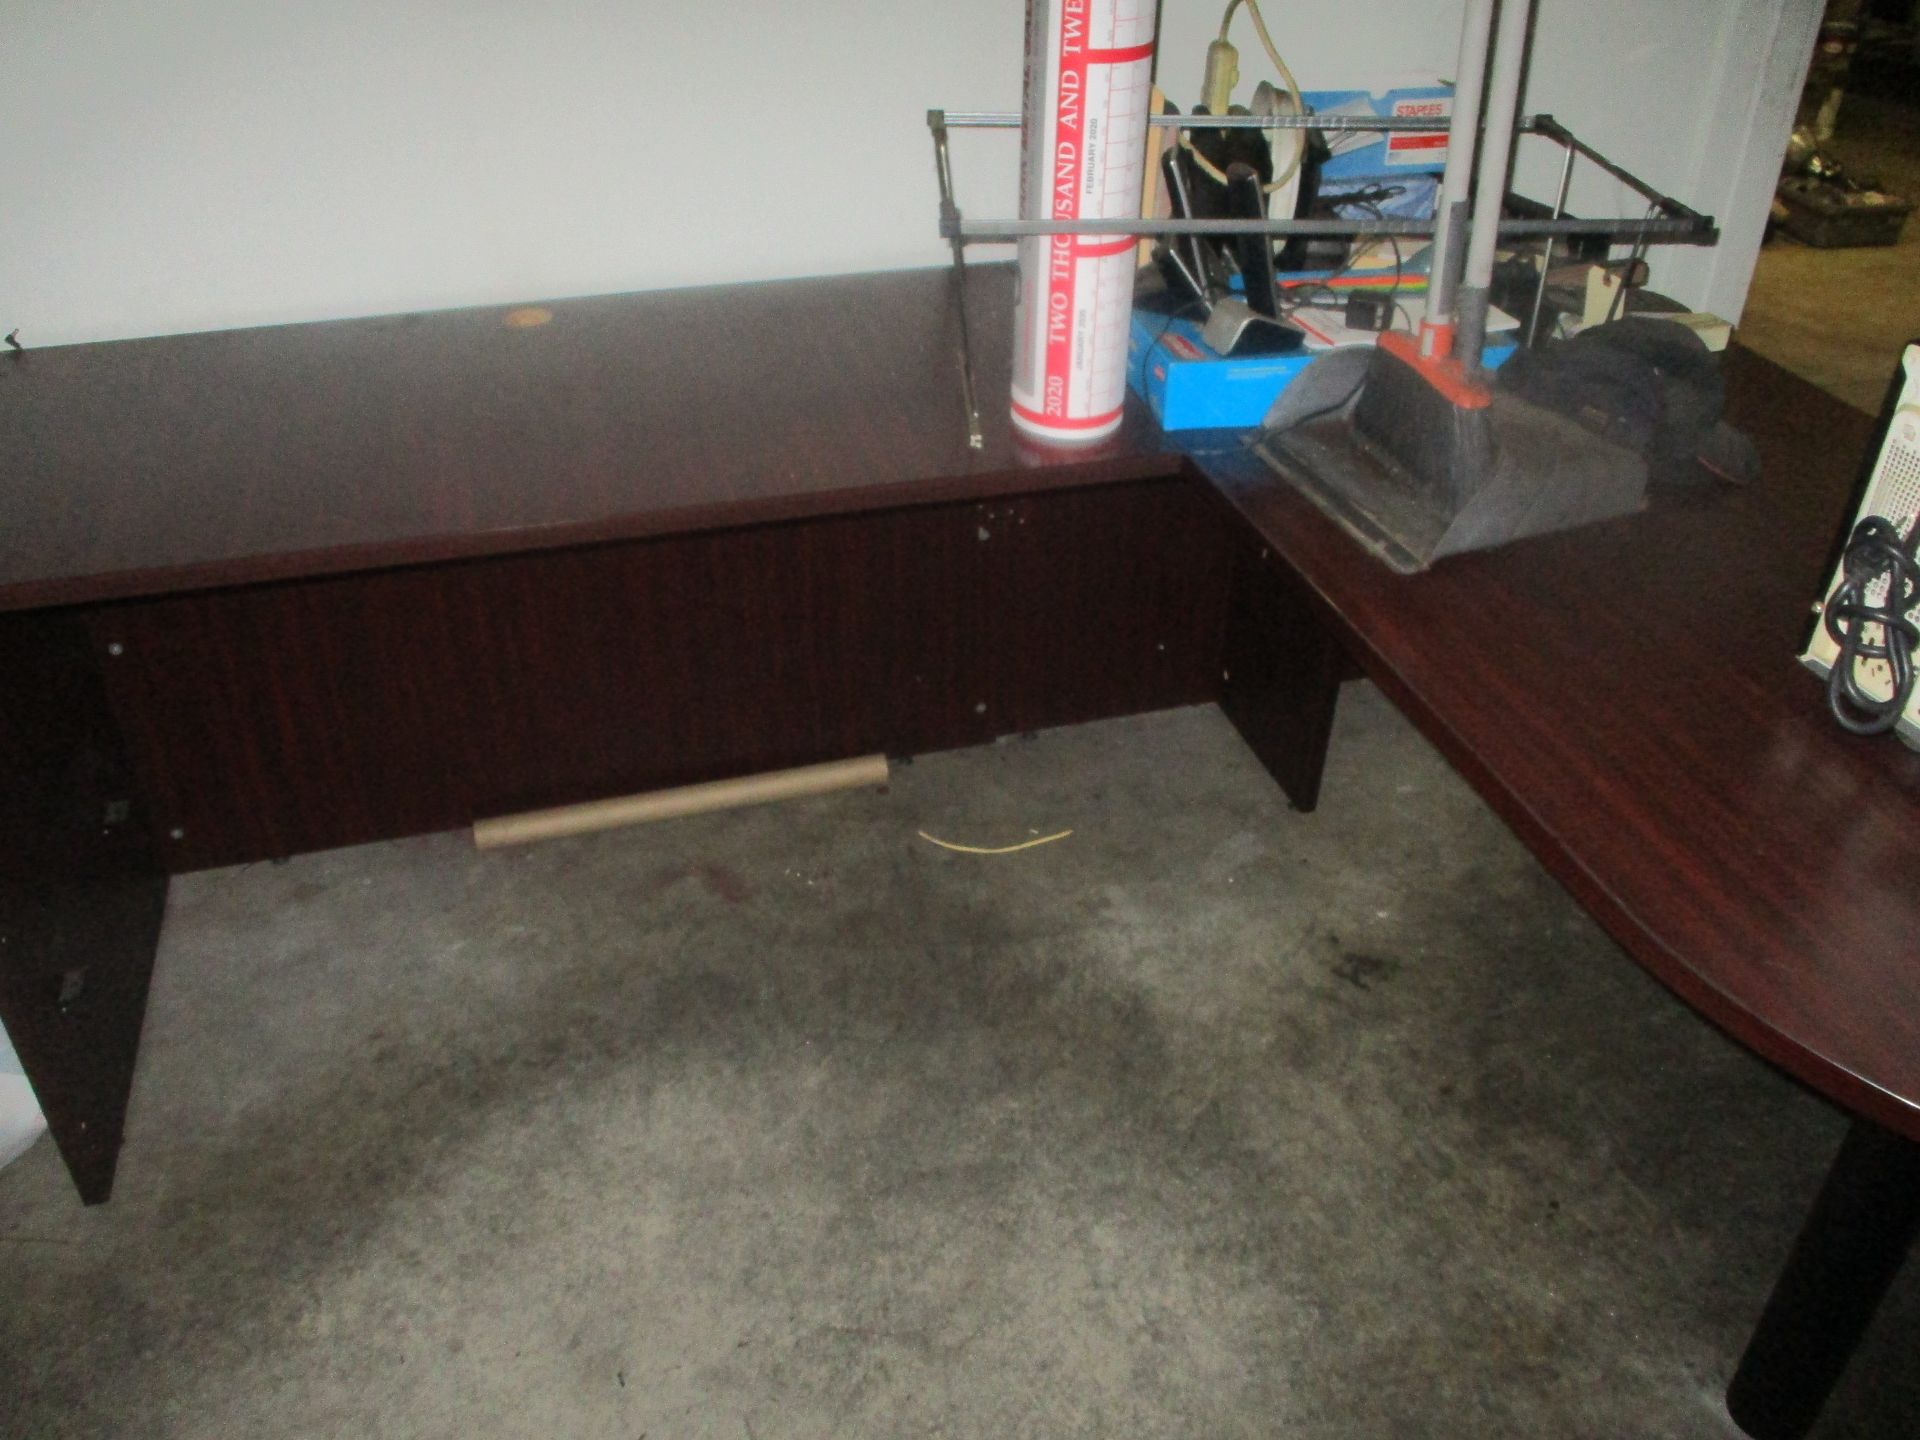 "L" Shaped Office Desk, 30" x 77" x 29", with 30" x 65" wing and Printer Stand 16" x 26" x 29"